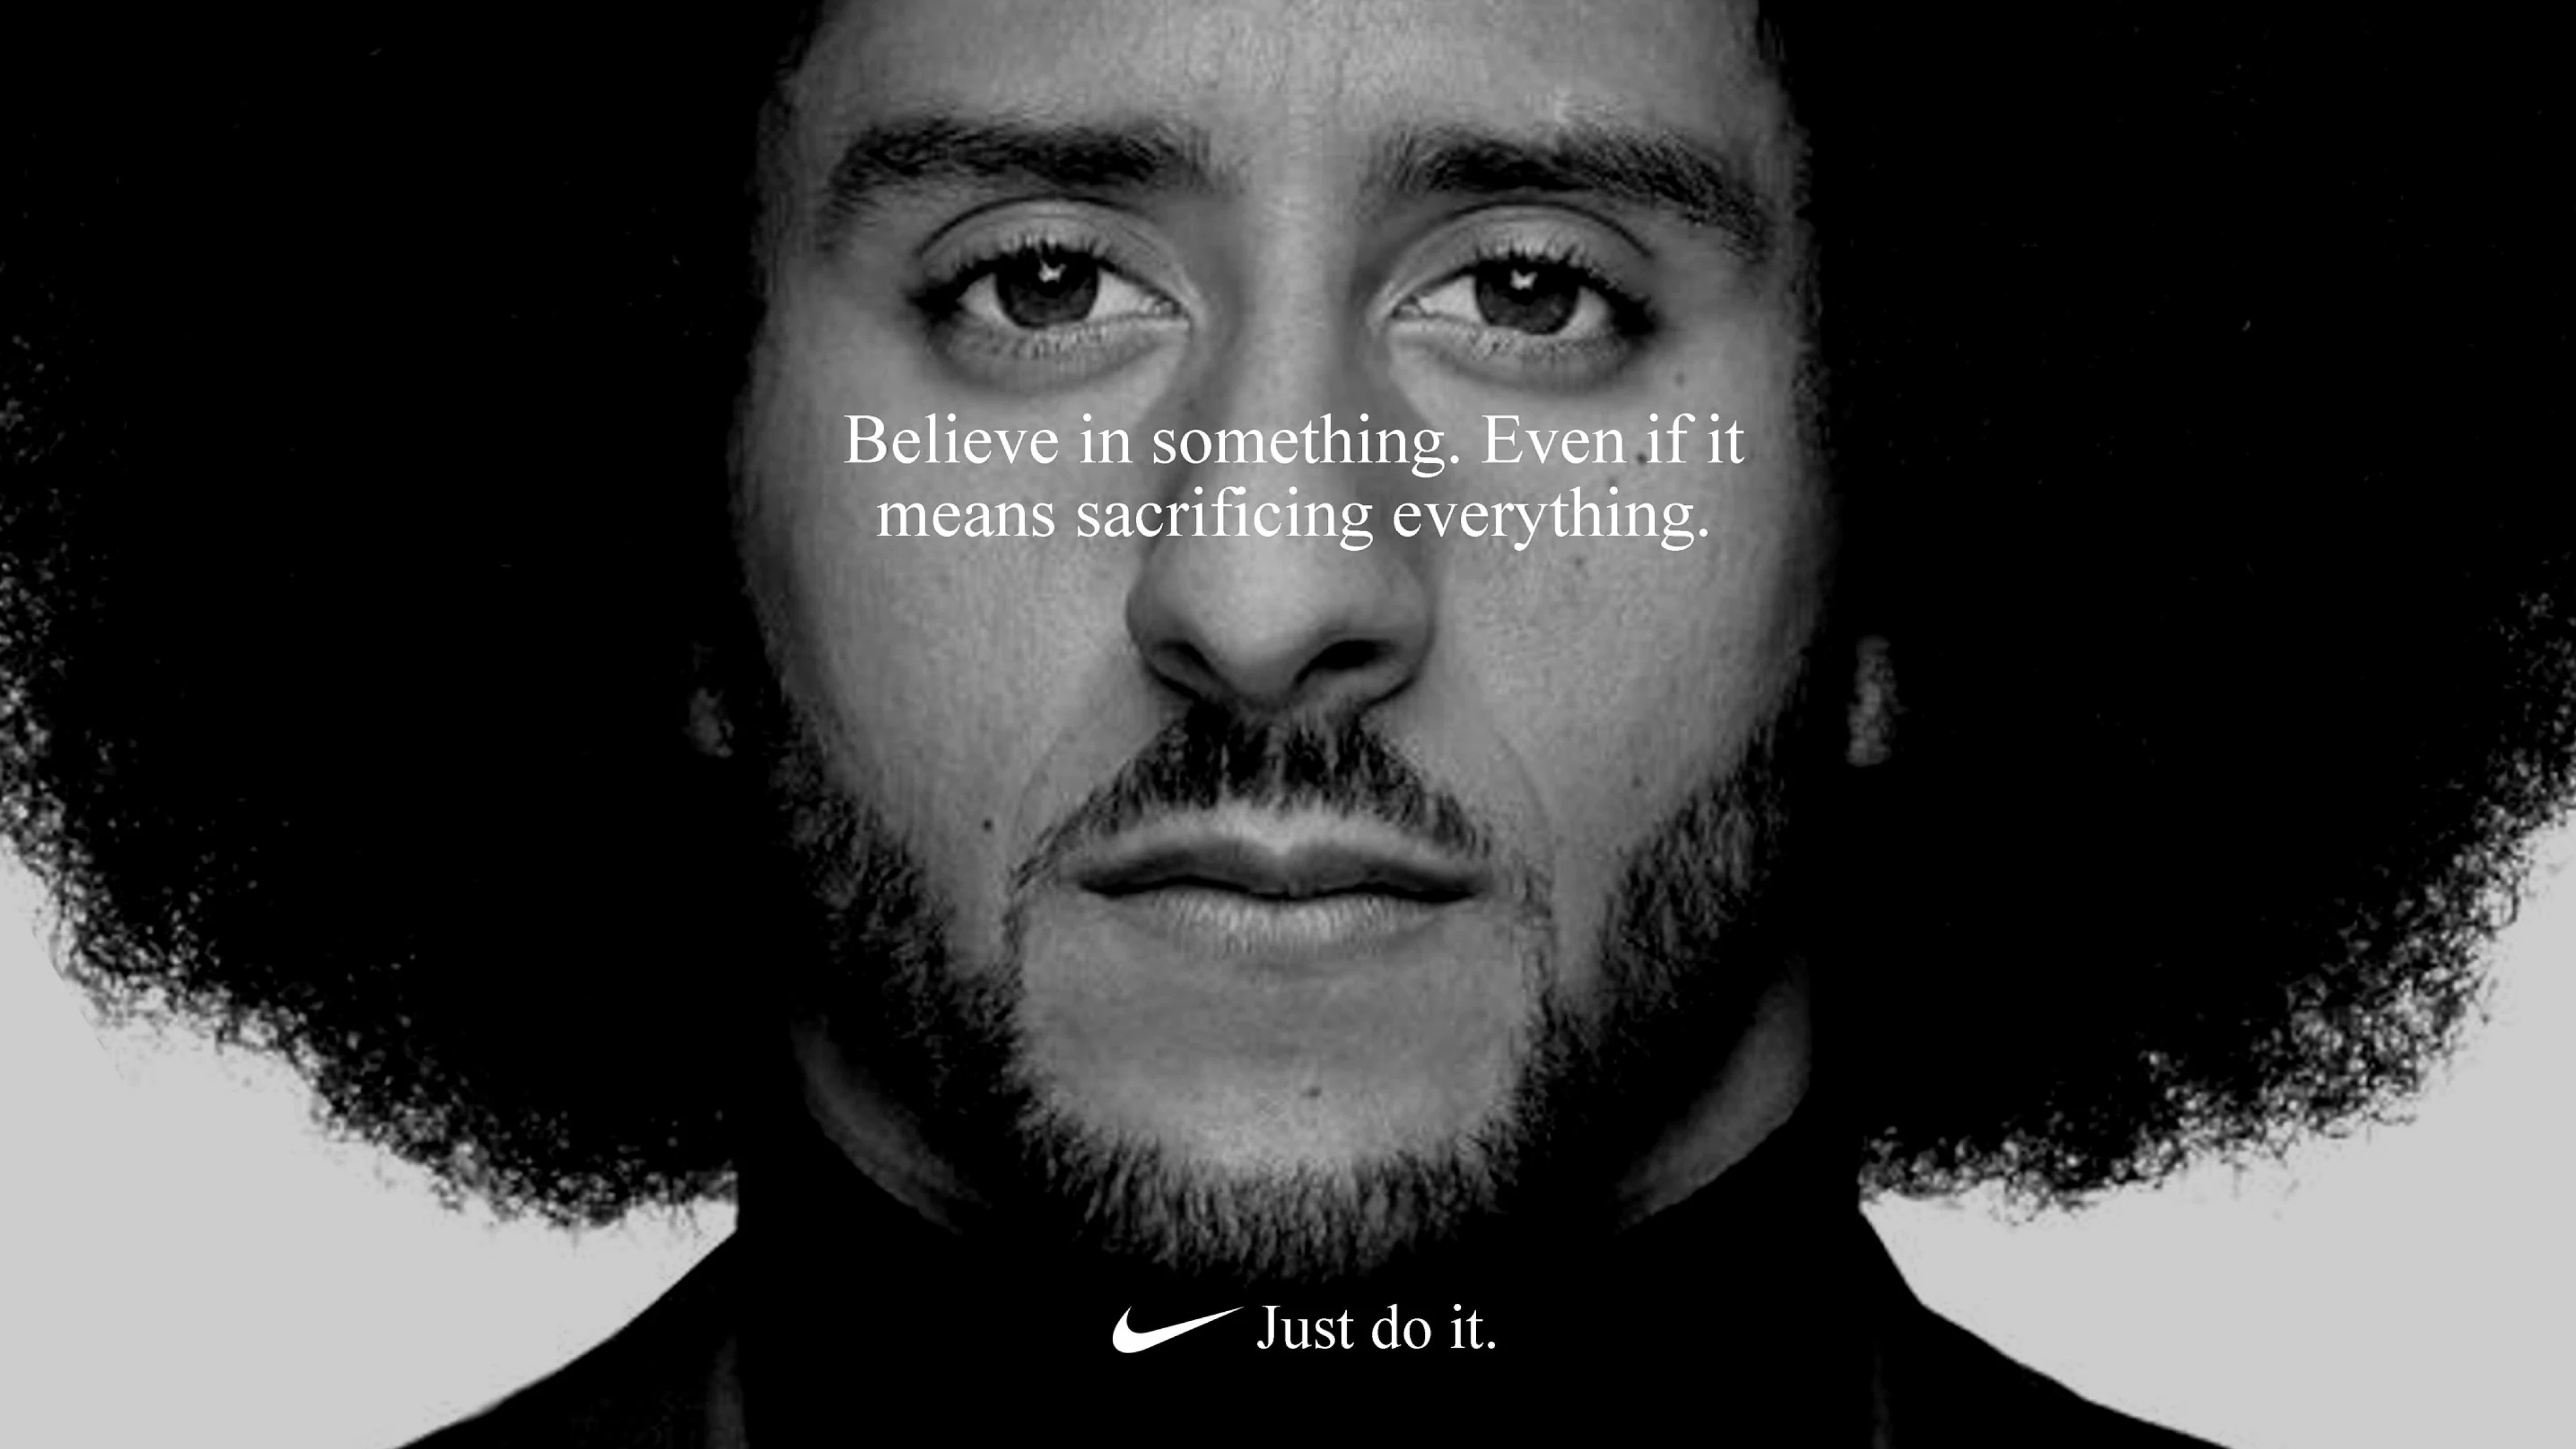 Nike Exemplifies Do It” Ethos With Colin Campaign